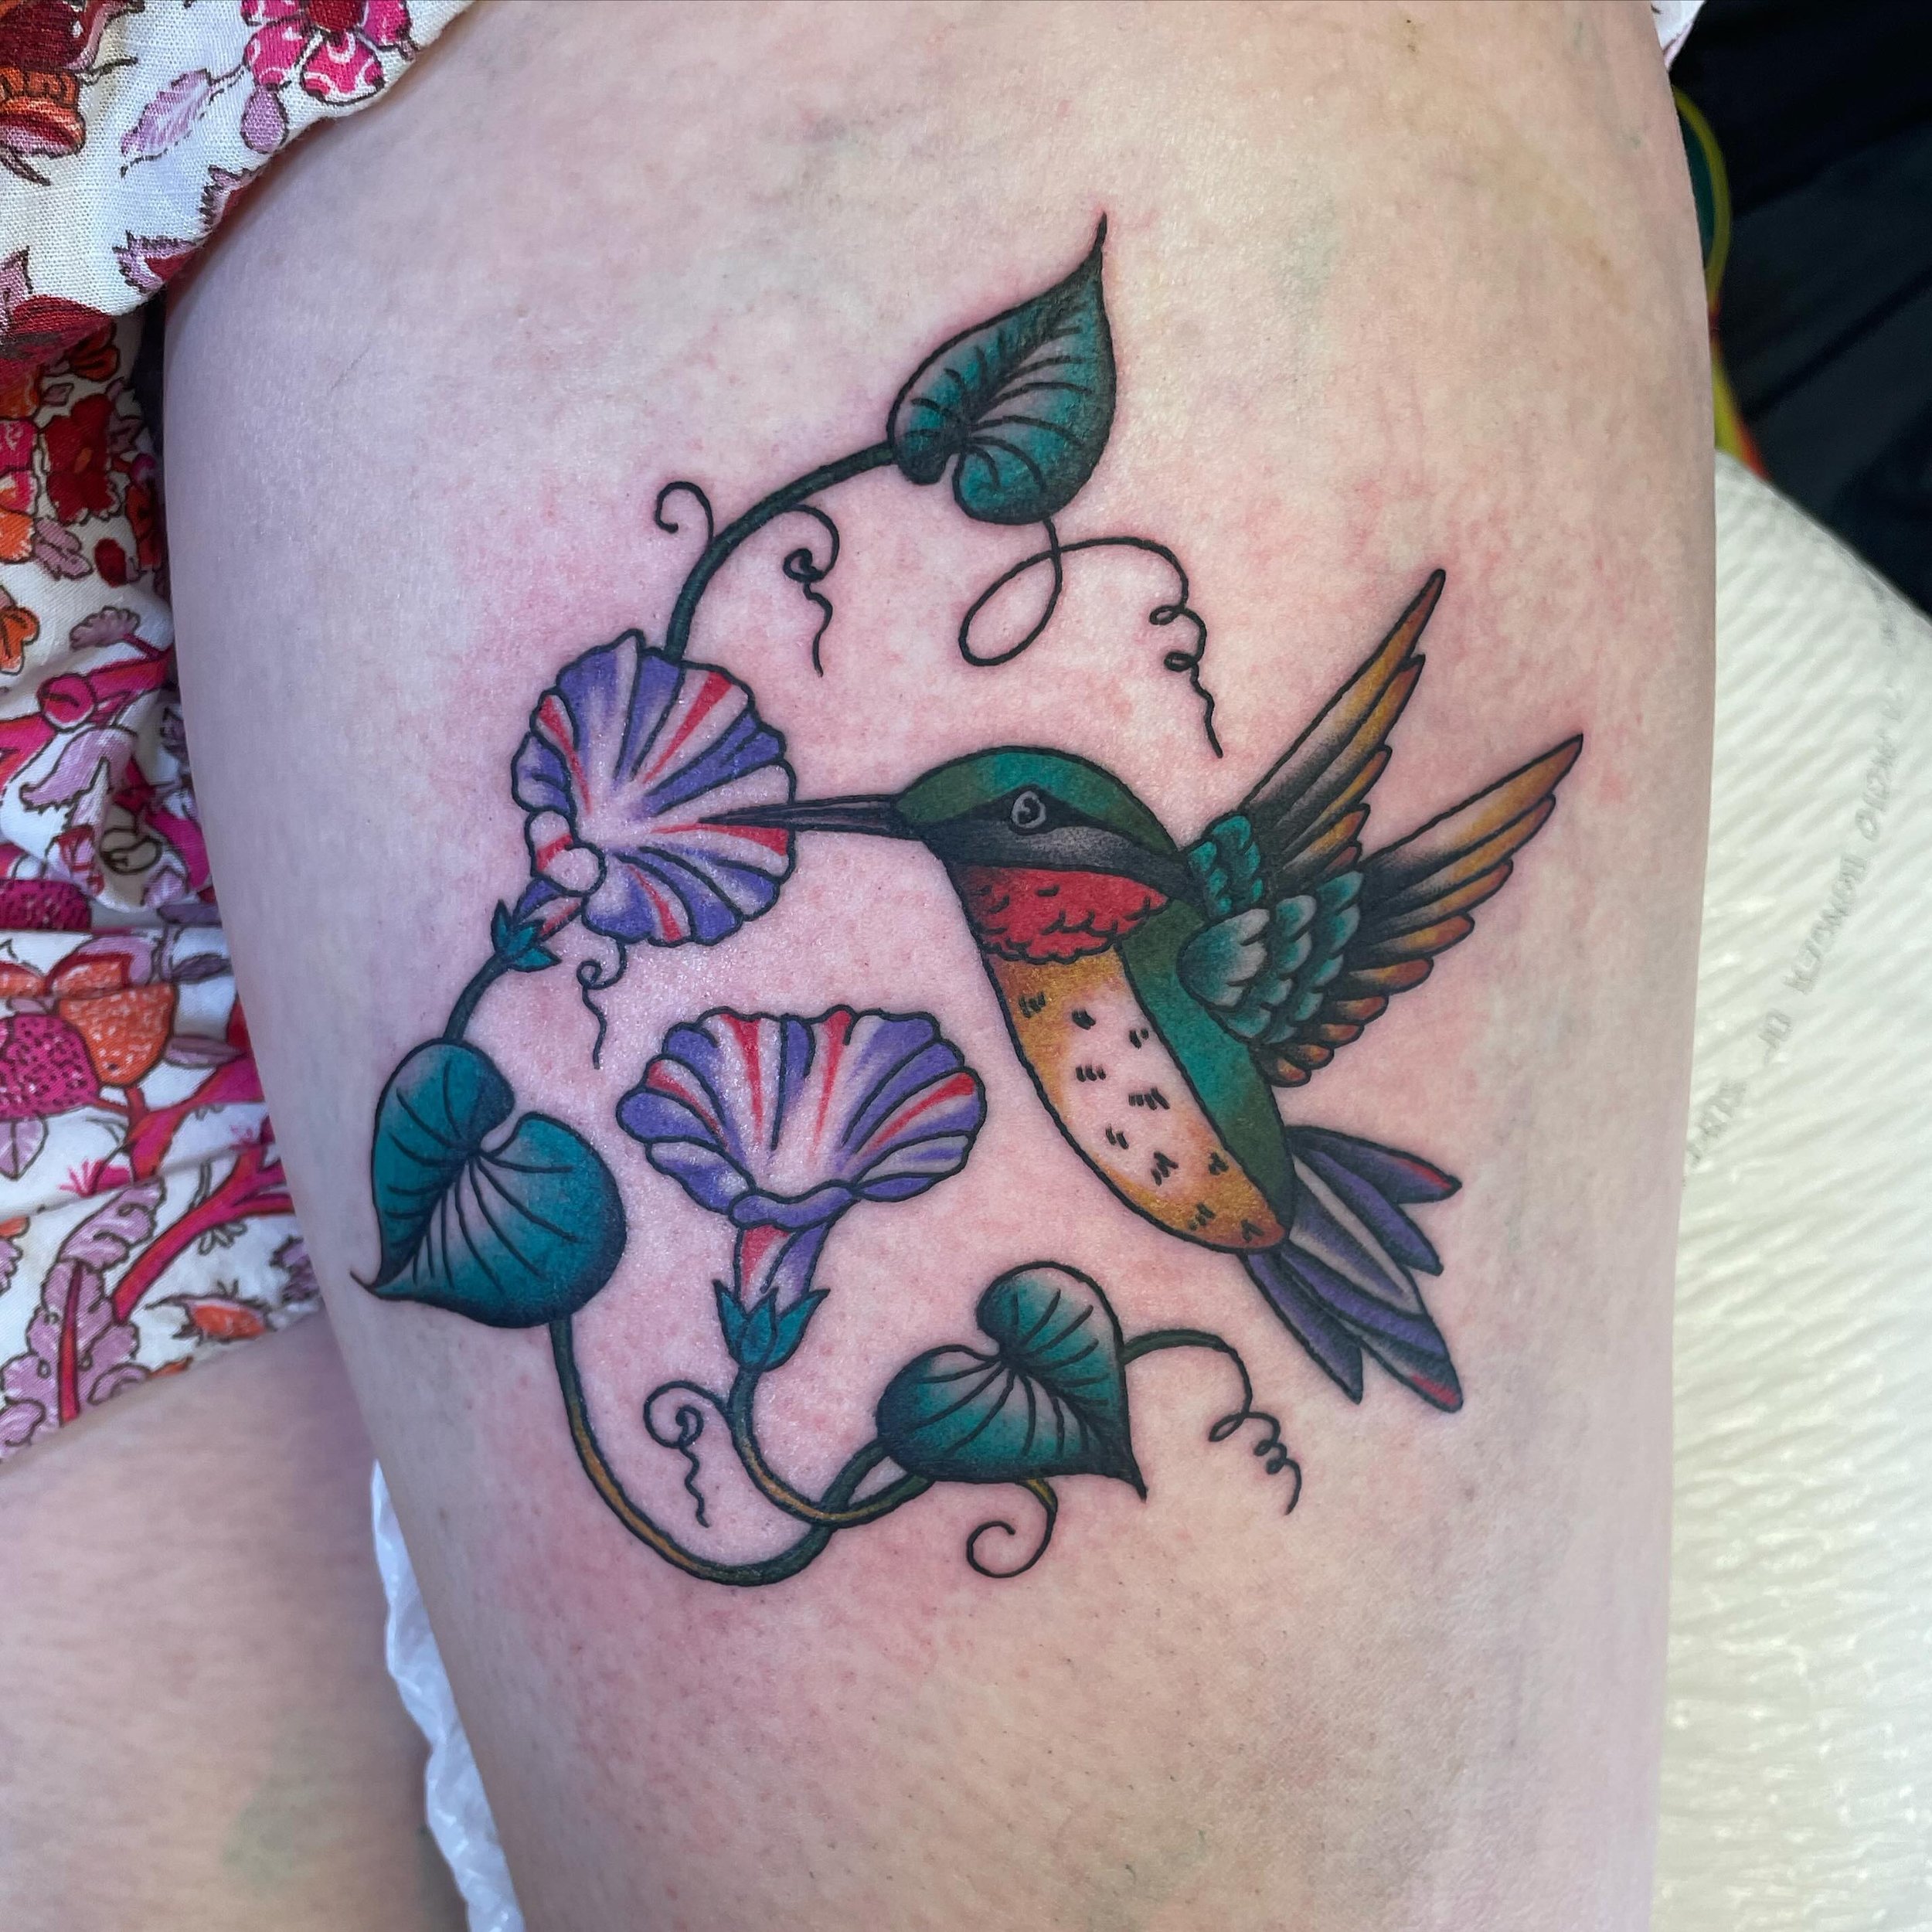 lil hummingbird from Dusty! @dusty.tat2 

to book with Dusty, fill out the form linked in their bio! 😎

#hummingbirdtattoo #naturelover #tinybirds